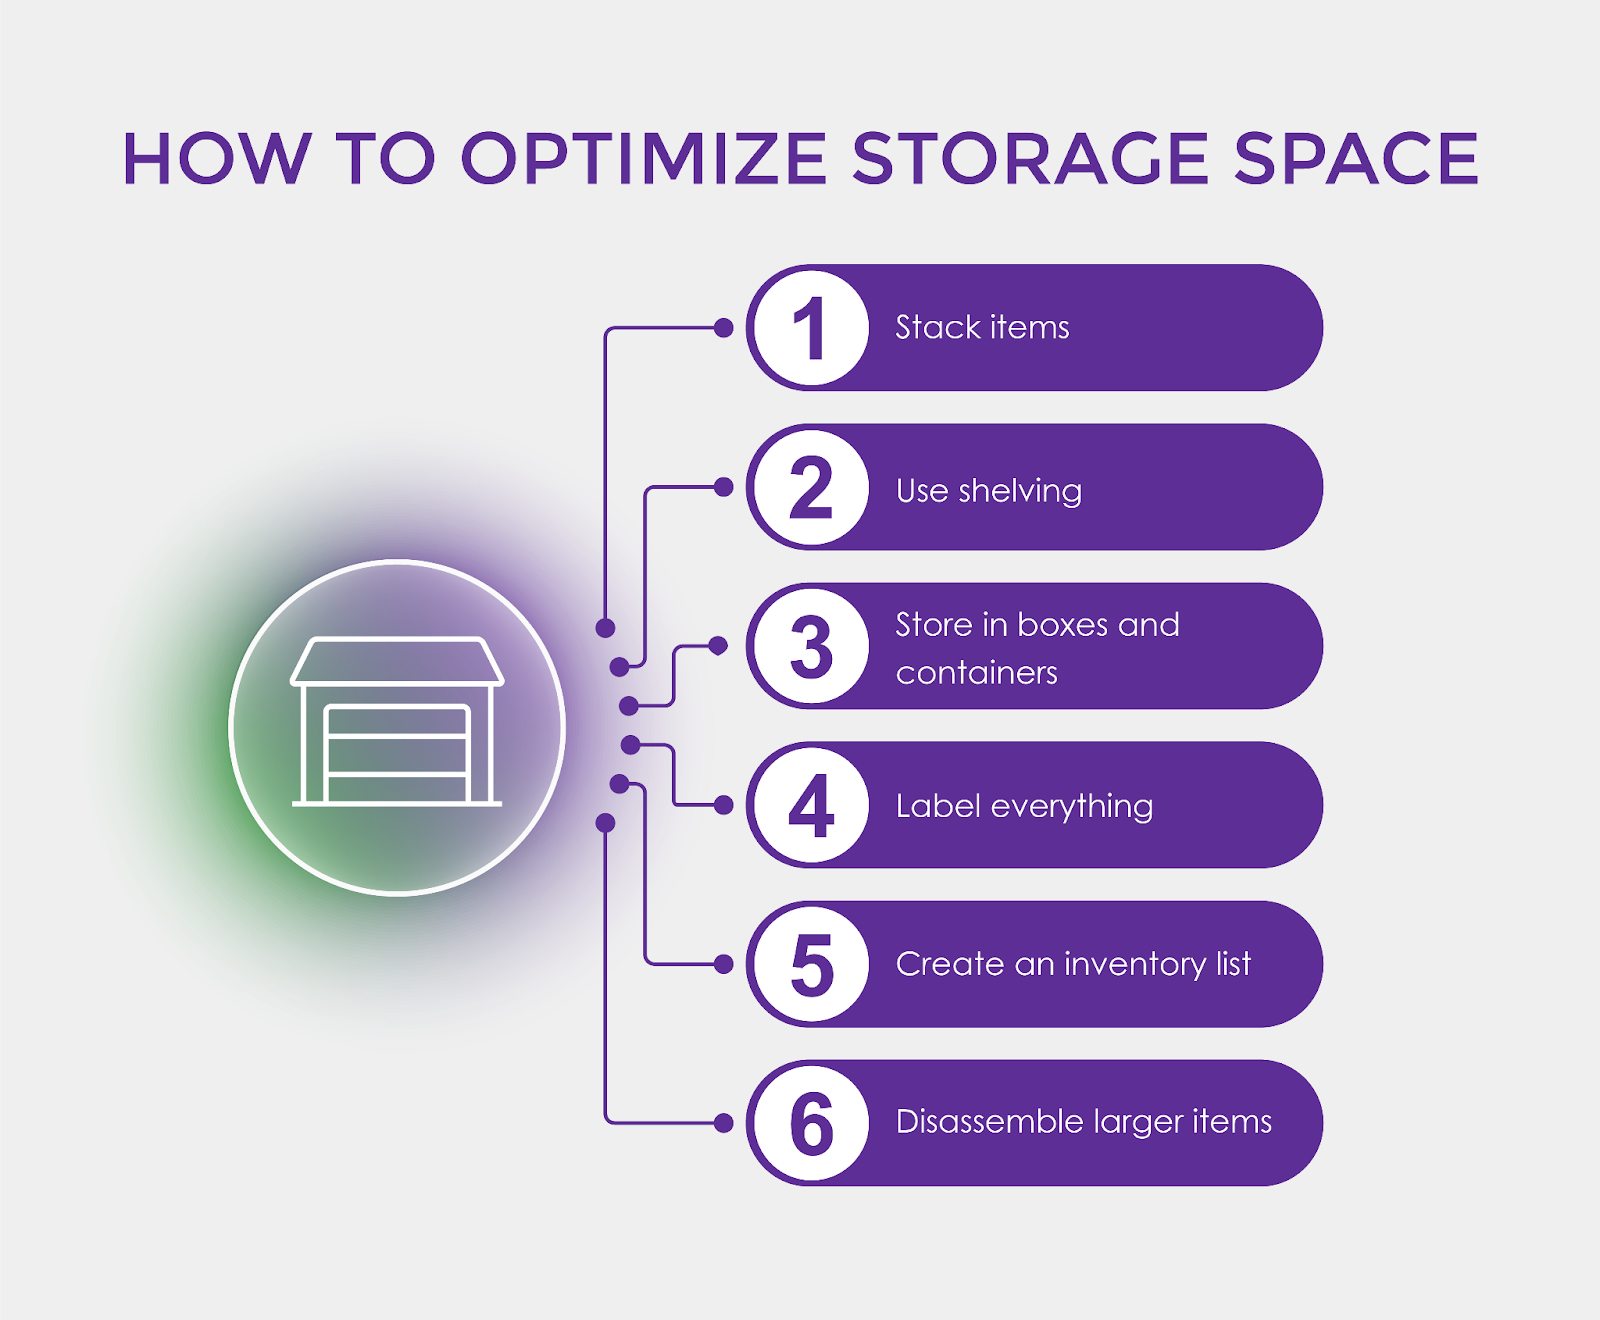 How to optimize storage space